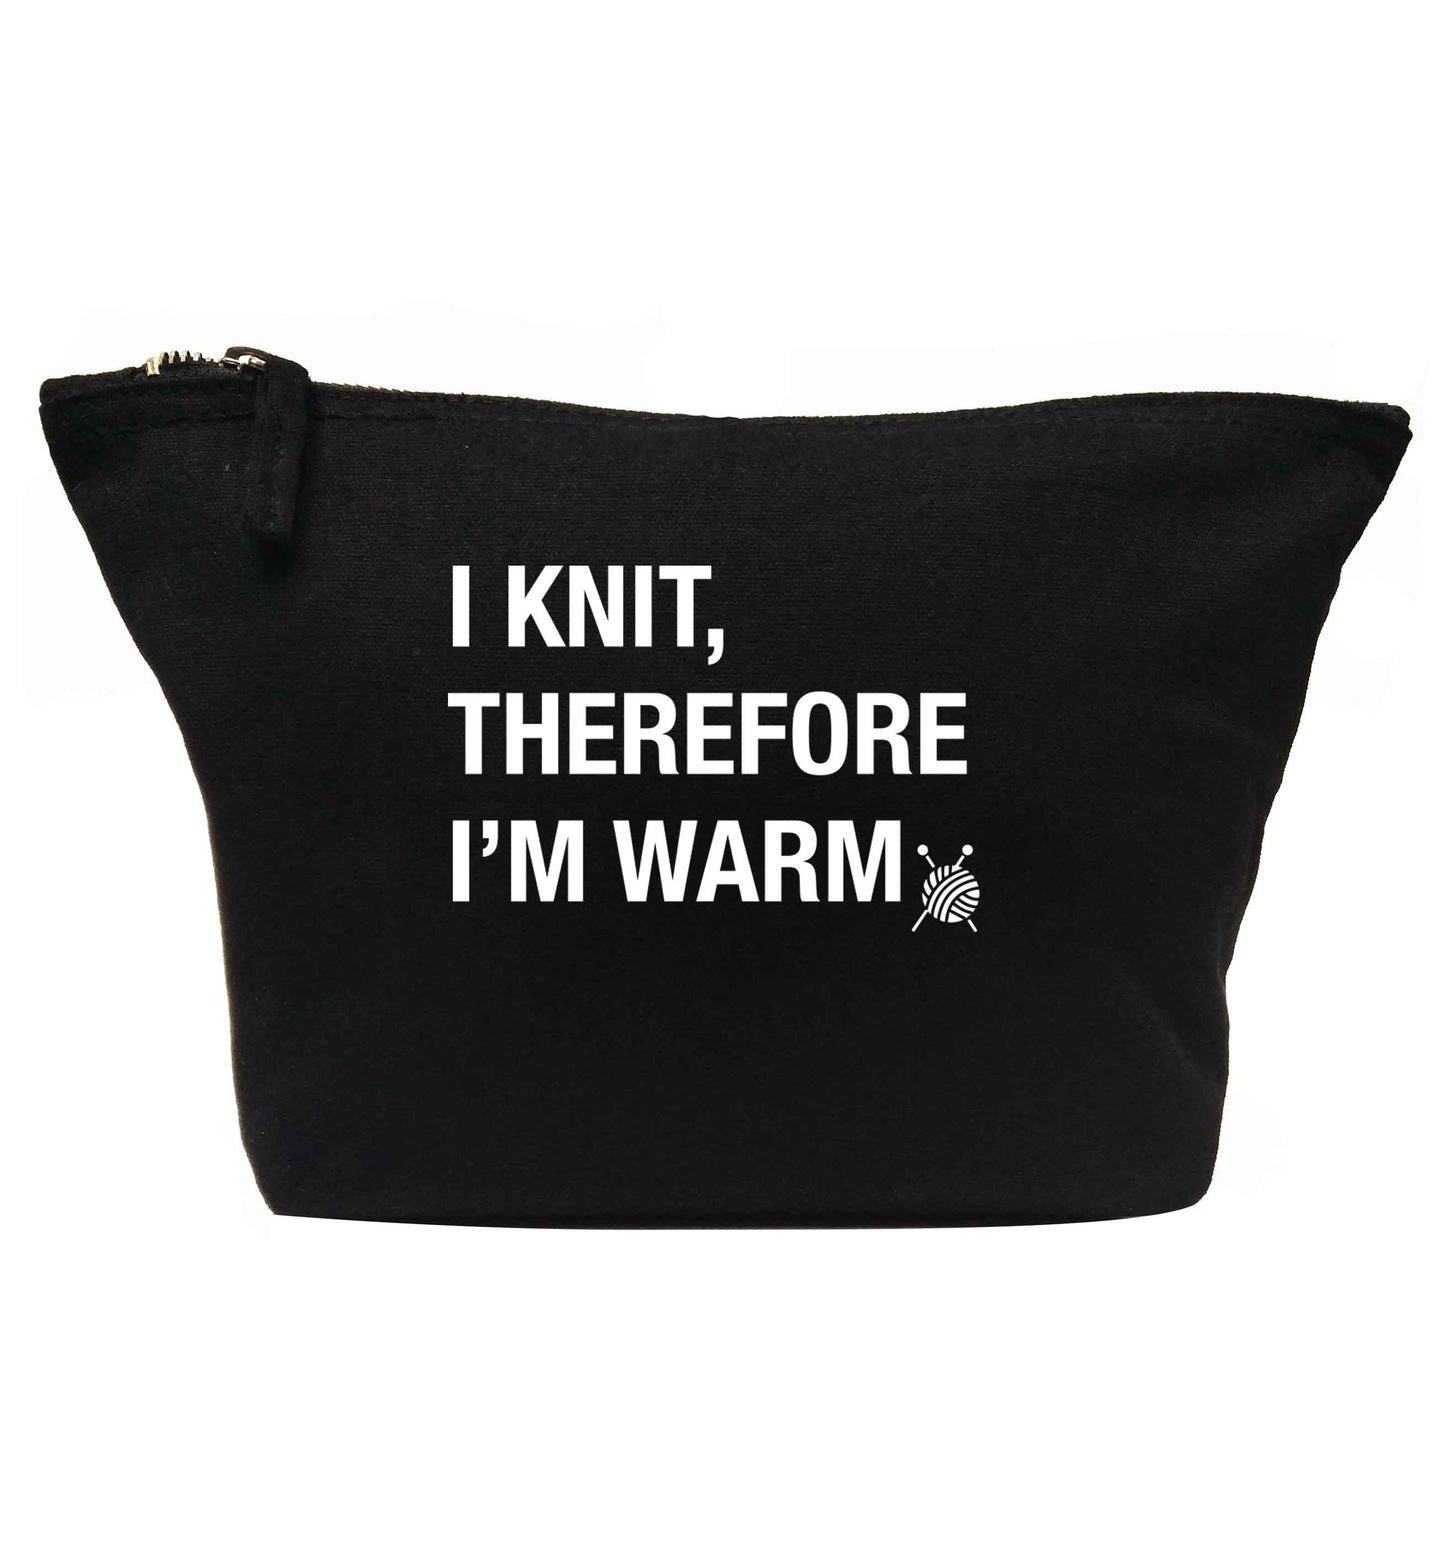 I knit therefore I'm warm | makeup / wash bag